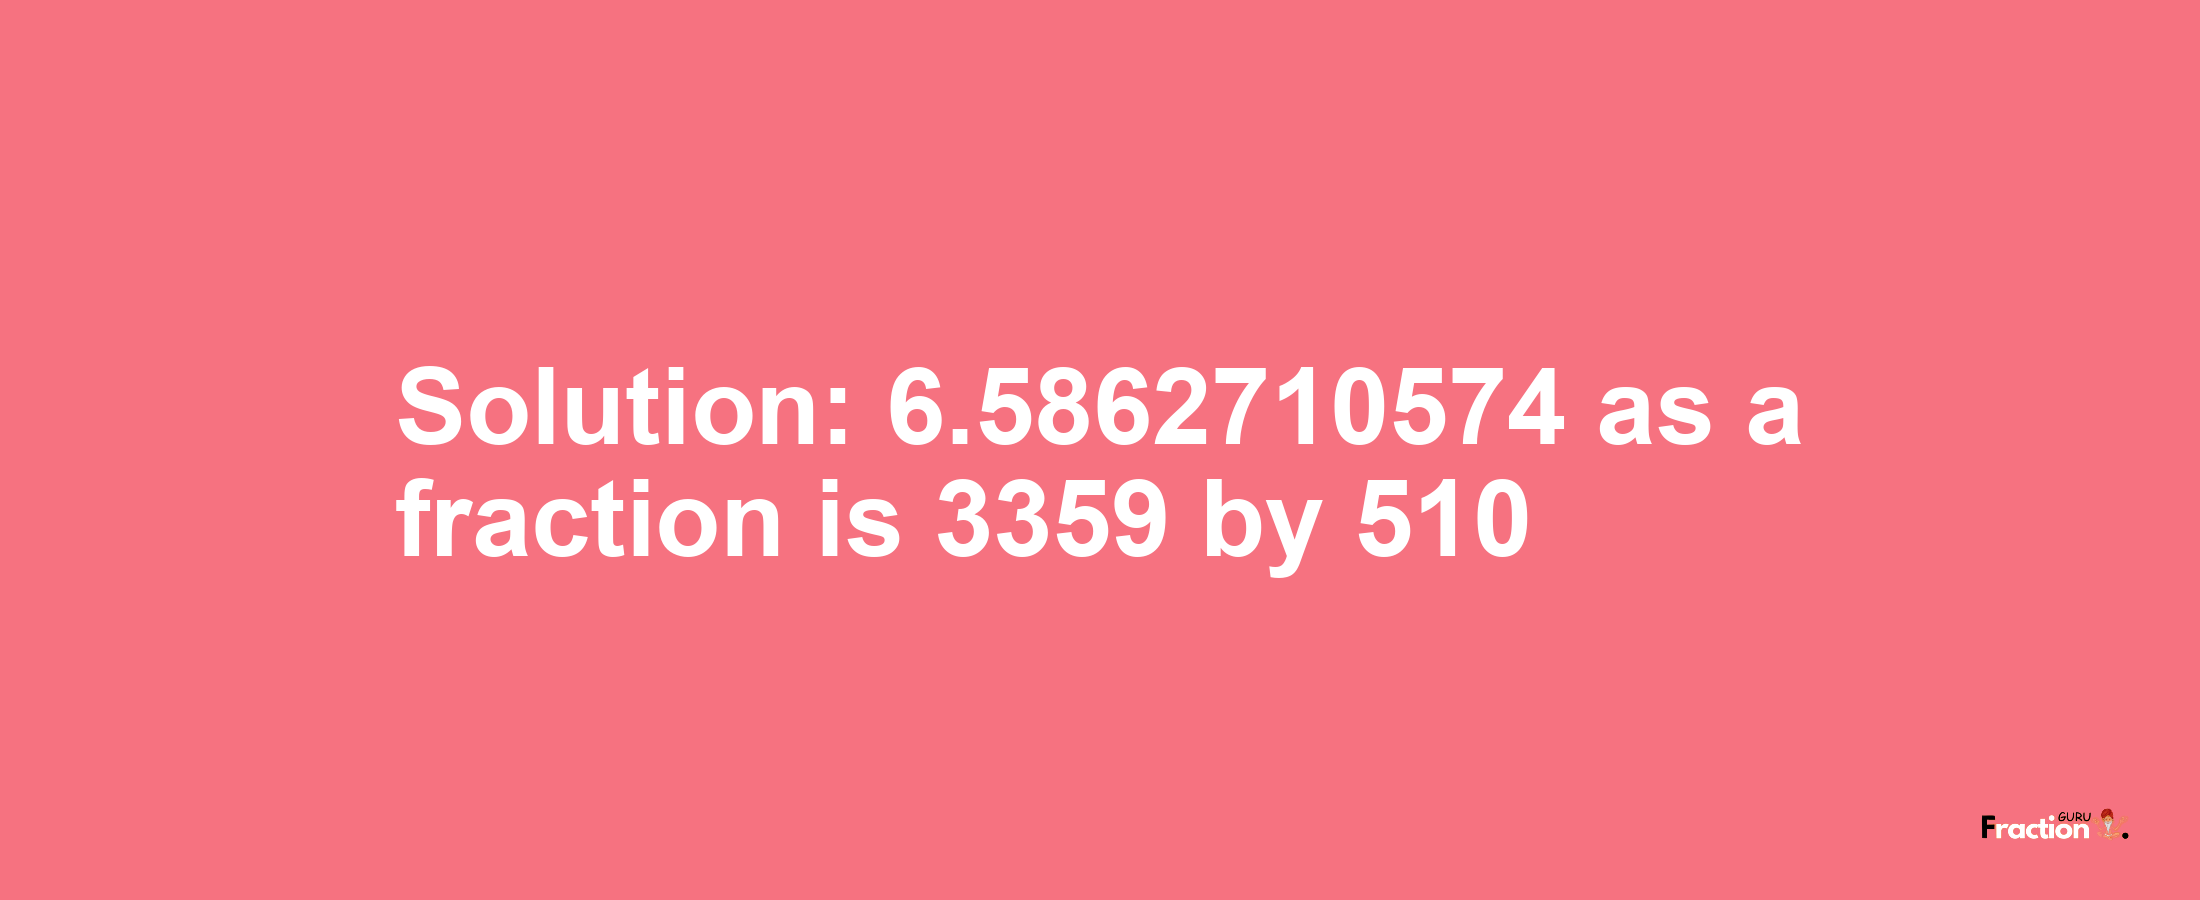 Solution:6.5862710574 as a fraction is 3359/510